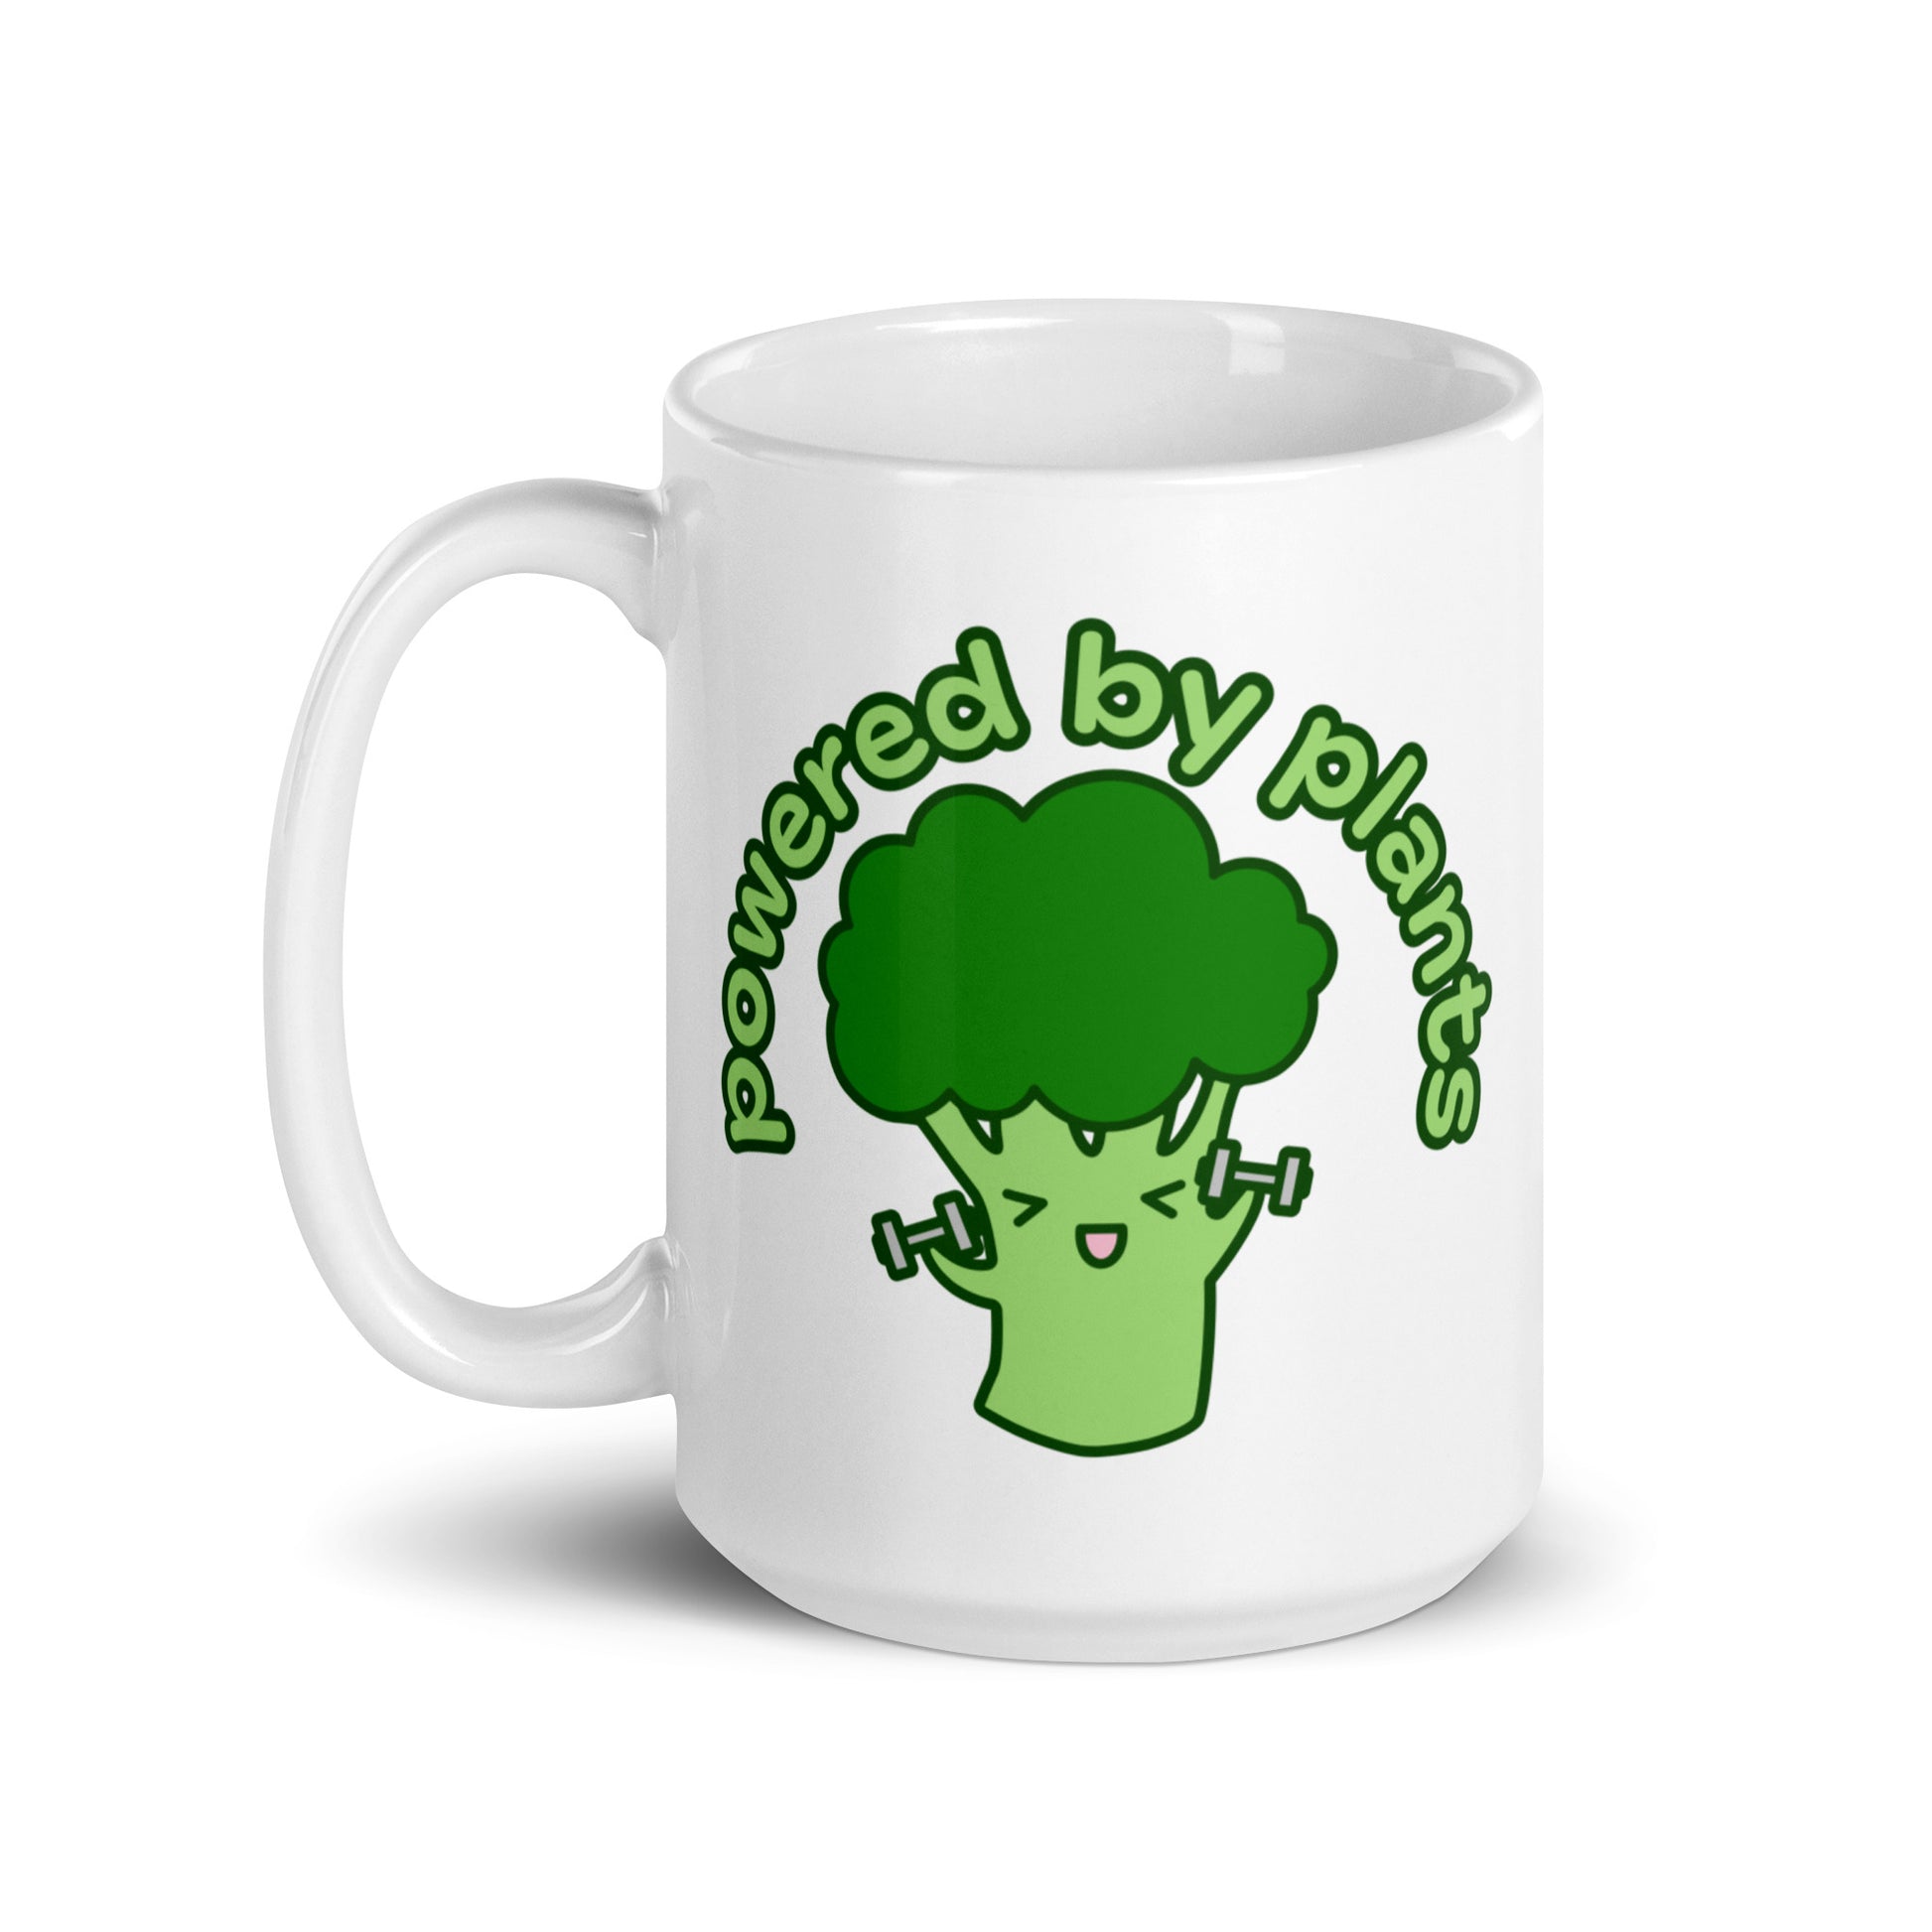 A white 15 ounce ceramic coffee mug featuring a cute illustration of a cartoon broccoli. The broccoli is excitedly lifting weights and text above him in an arc reads "powered by plants".